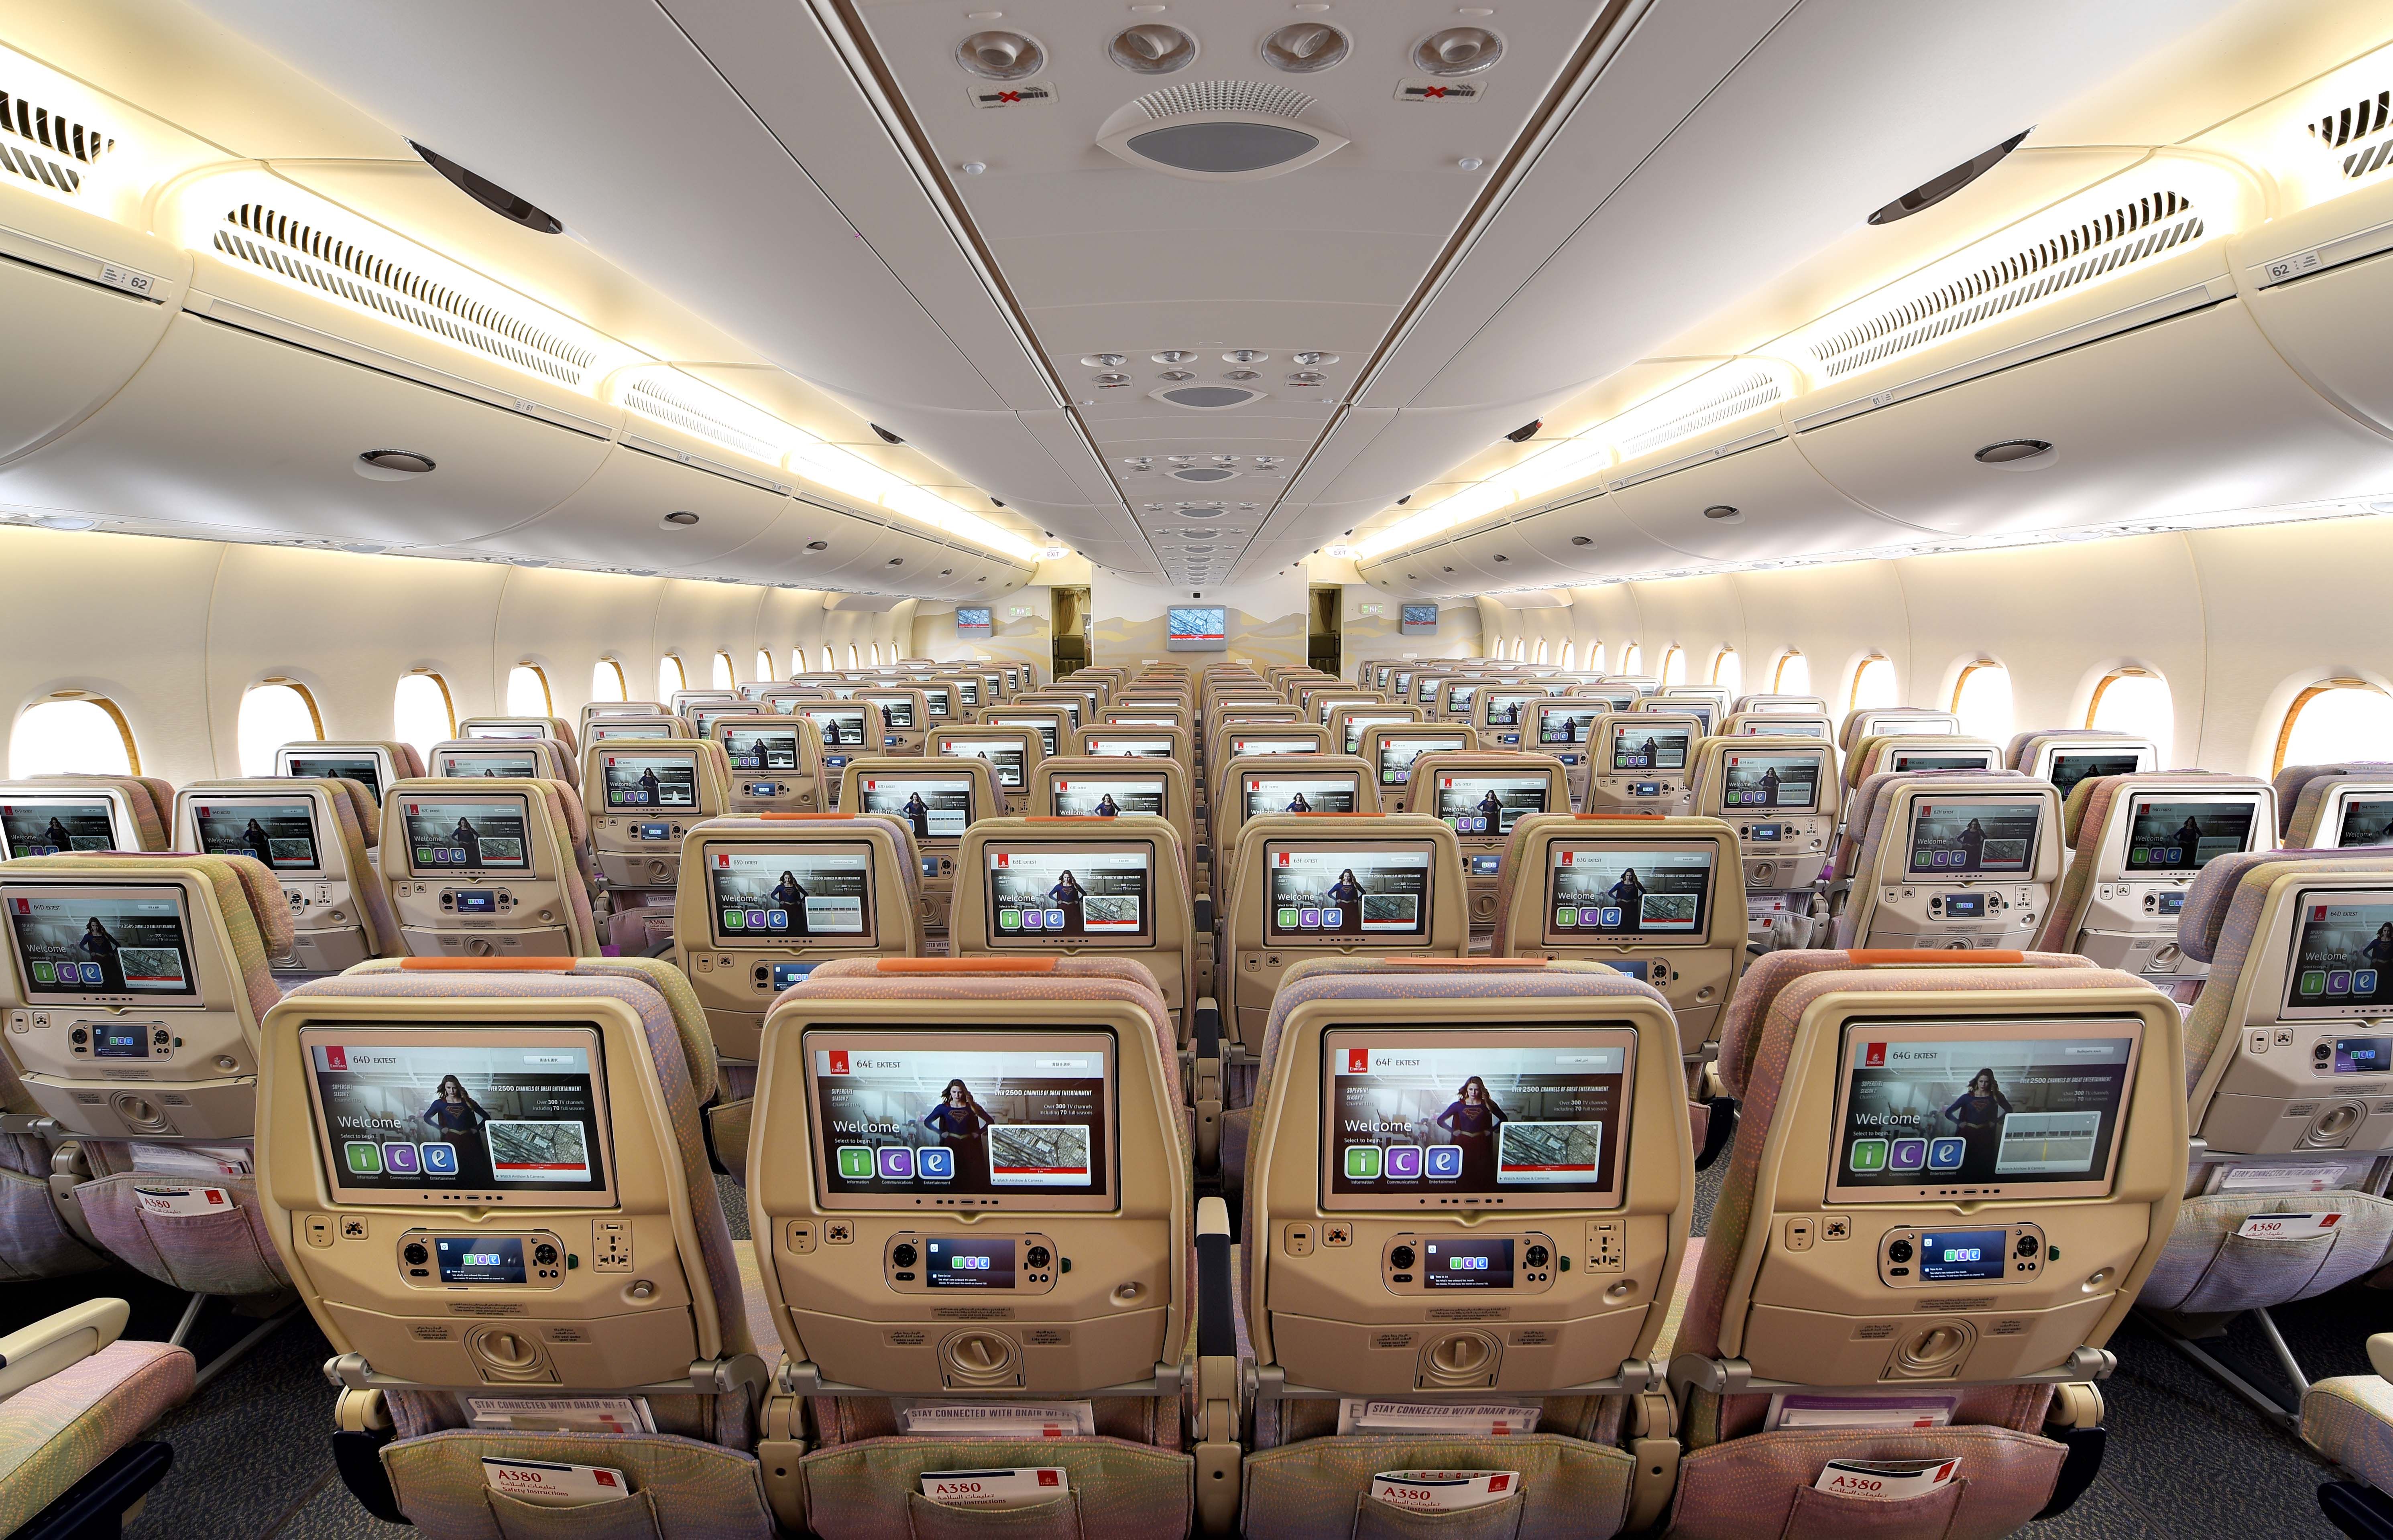 A wide-angle shot of Emirates Economy Class, with all seat-back entertainment screens visible at a glance.